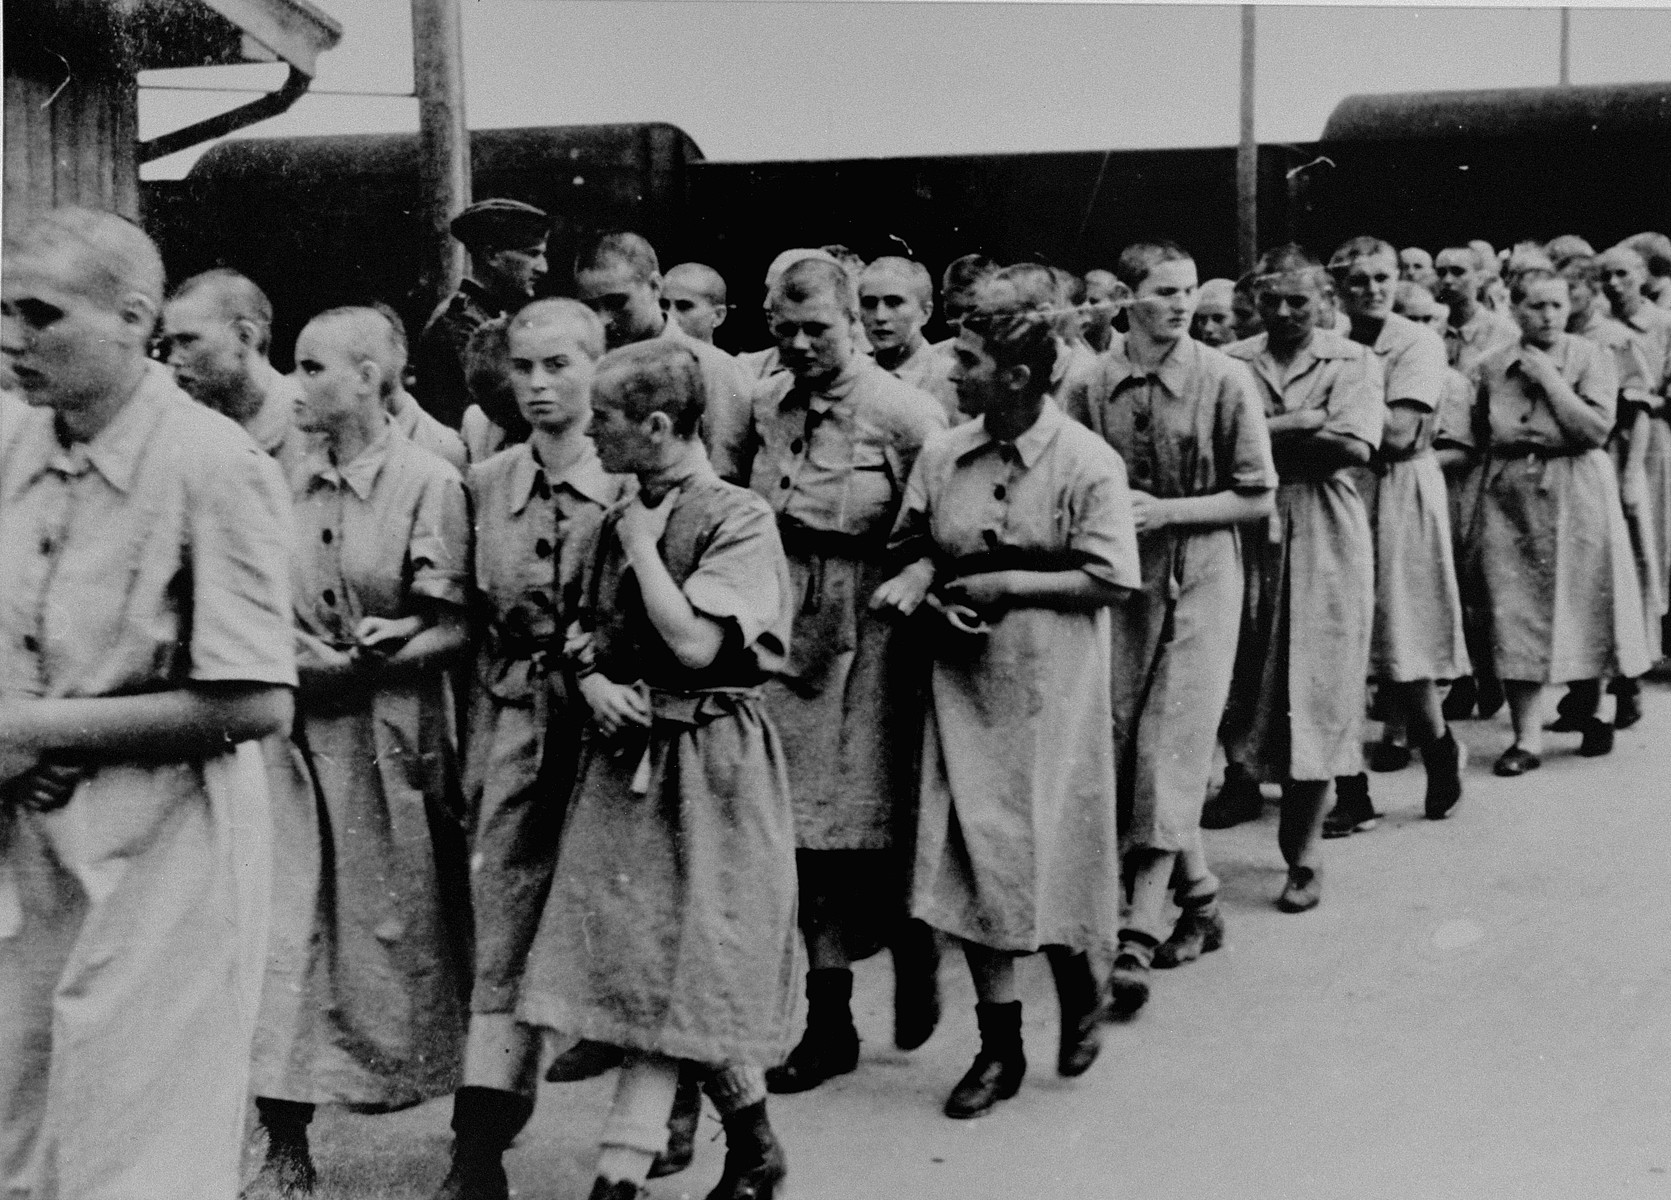 Jewish women from Subcarpathian Rus who have been selected for forced labor at Auschwitz-Birkenau, march toward their barracks after disinfection and headshaving.

Among those pictured are Ella Hart Guttman (in the center with dark hair, in the outside row facing inward) from Uzhgorod and next to her, Lida Hausler Leibovics also of Uzhgorod. The tall woman looking to her left is Eva Fahidi from Szeged.